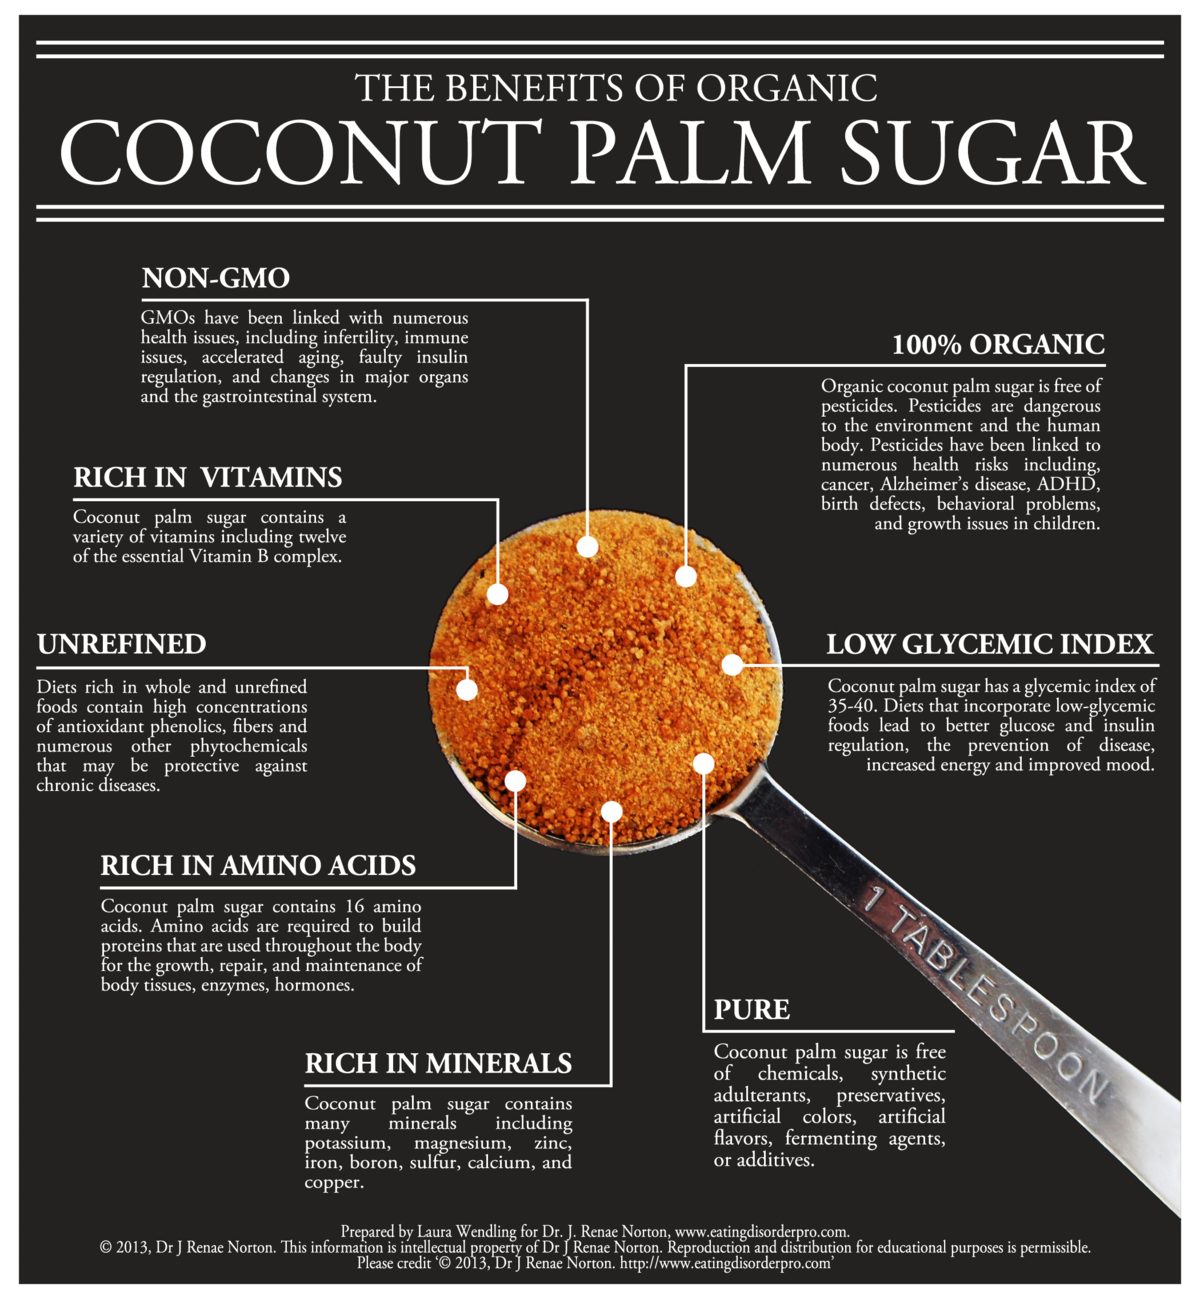 the benefits of coconut palm sugar infographic